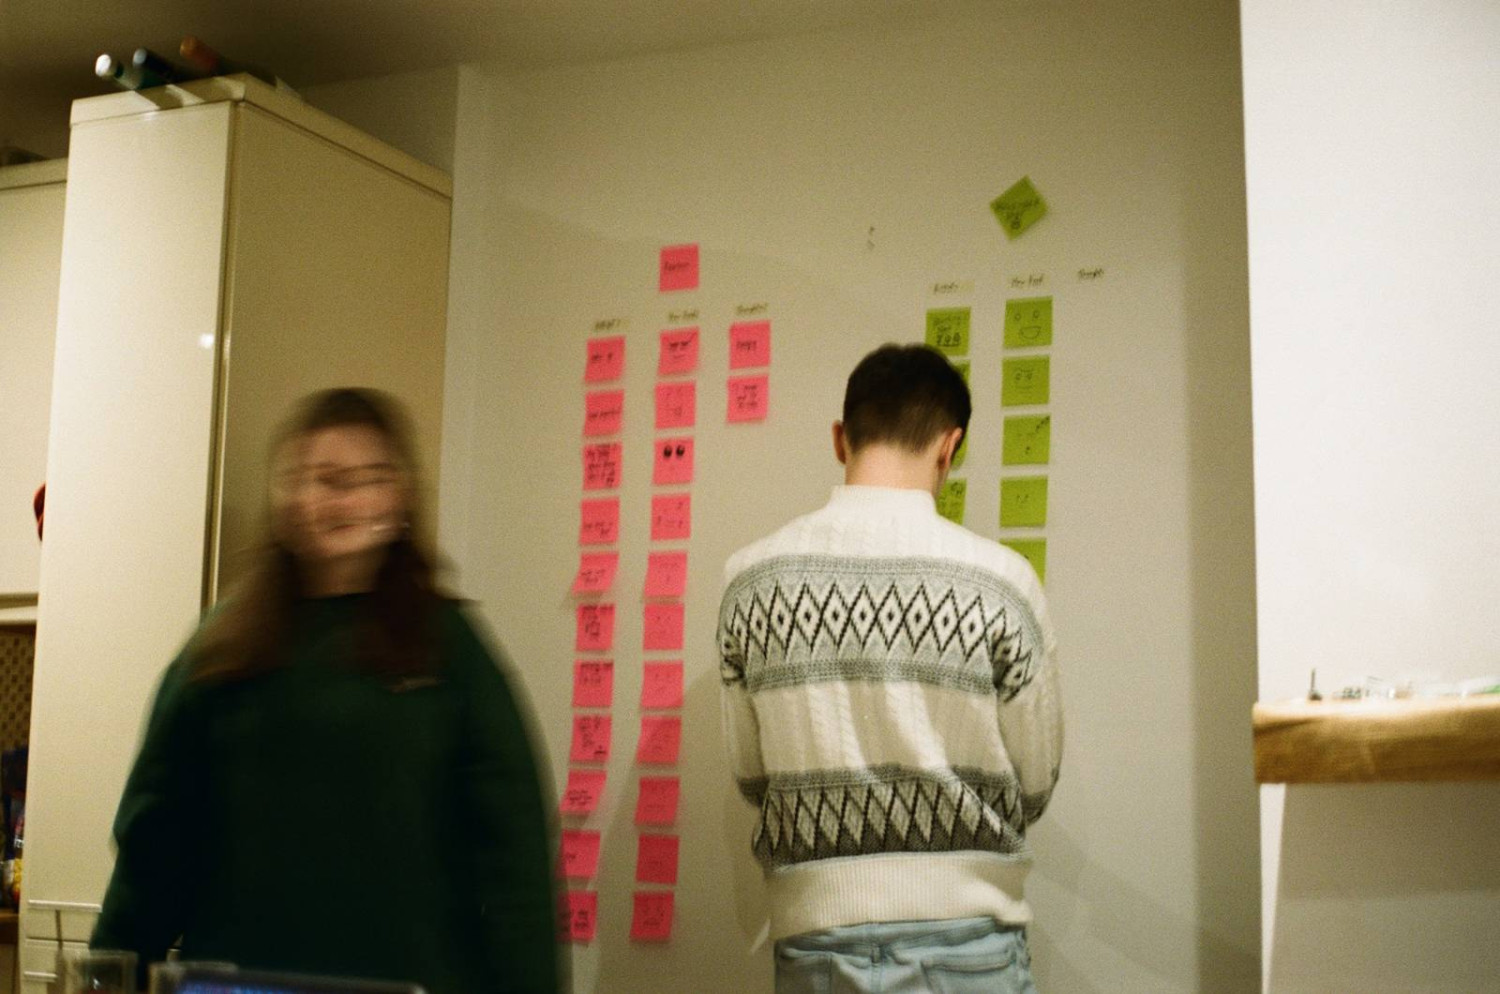 Research workshop - User journey mapping